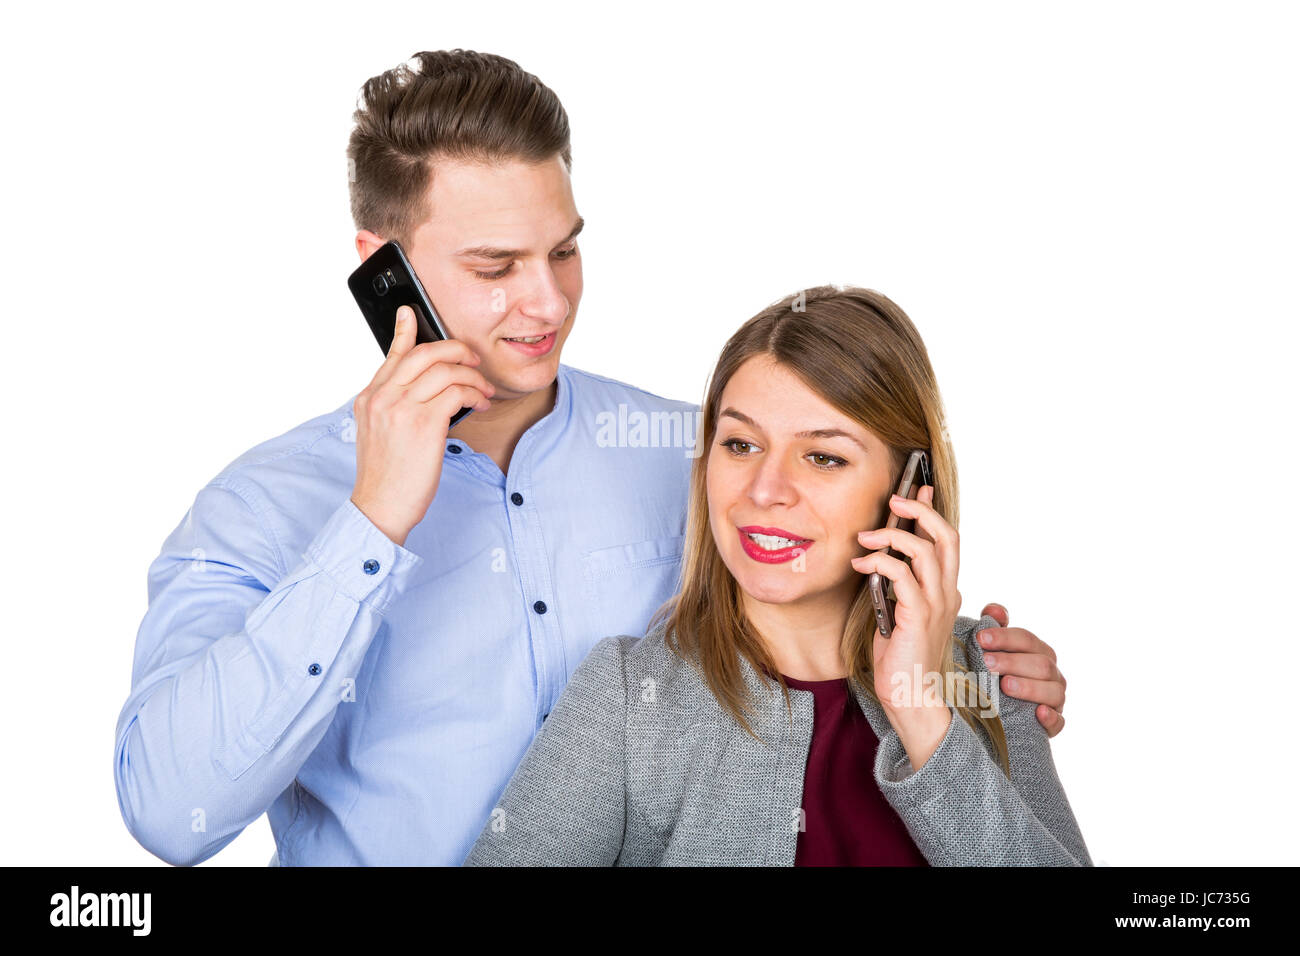 Picture of a young couple talking on the phone, posing on i image picture